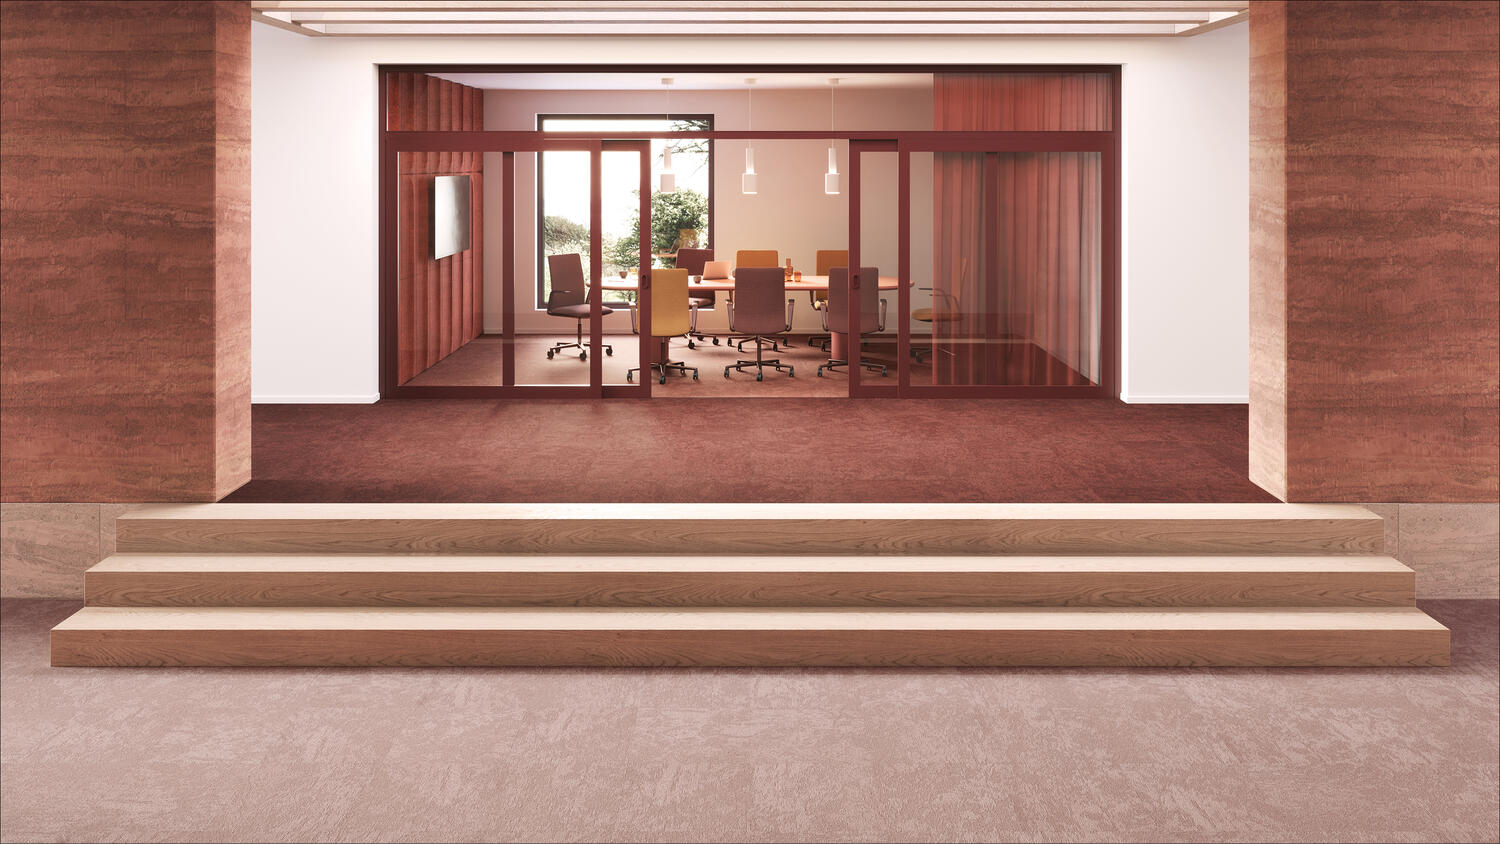 Workspace organic design with DESSO Desert carpet tile new muted shades